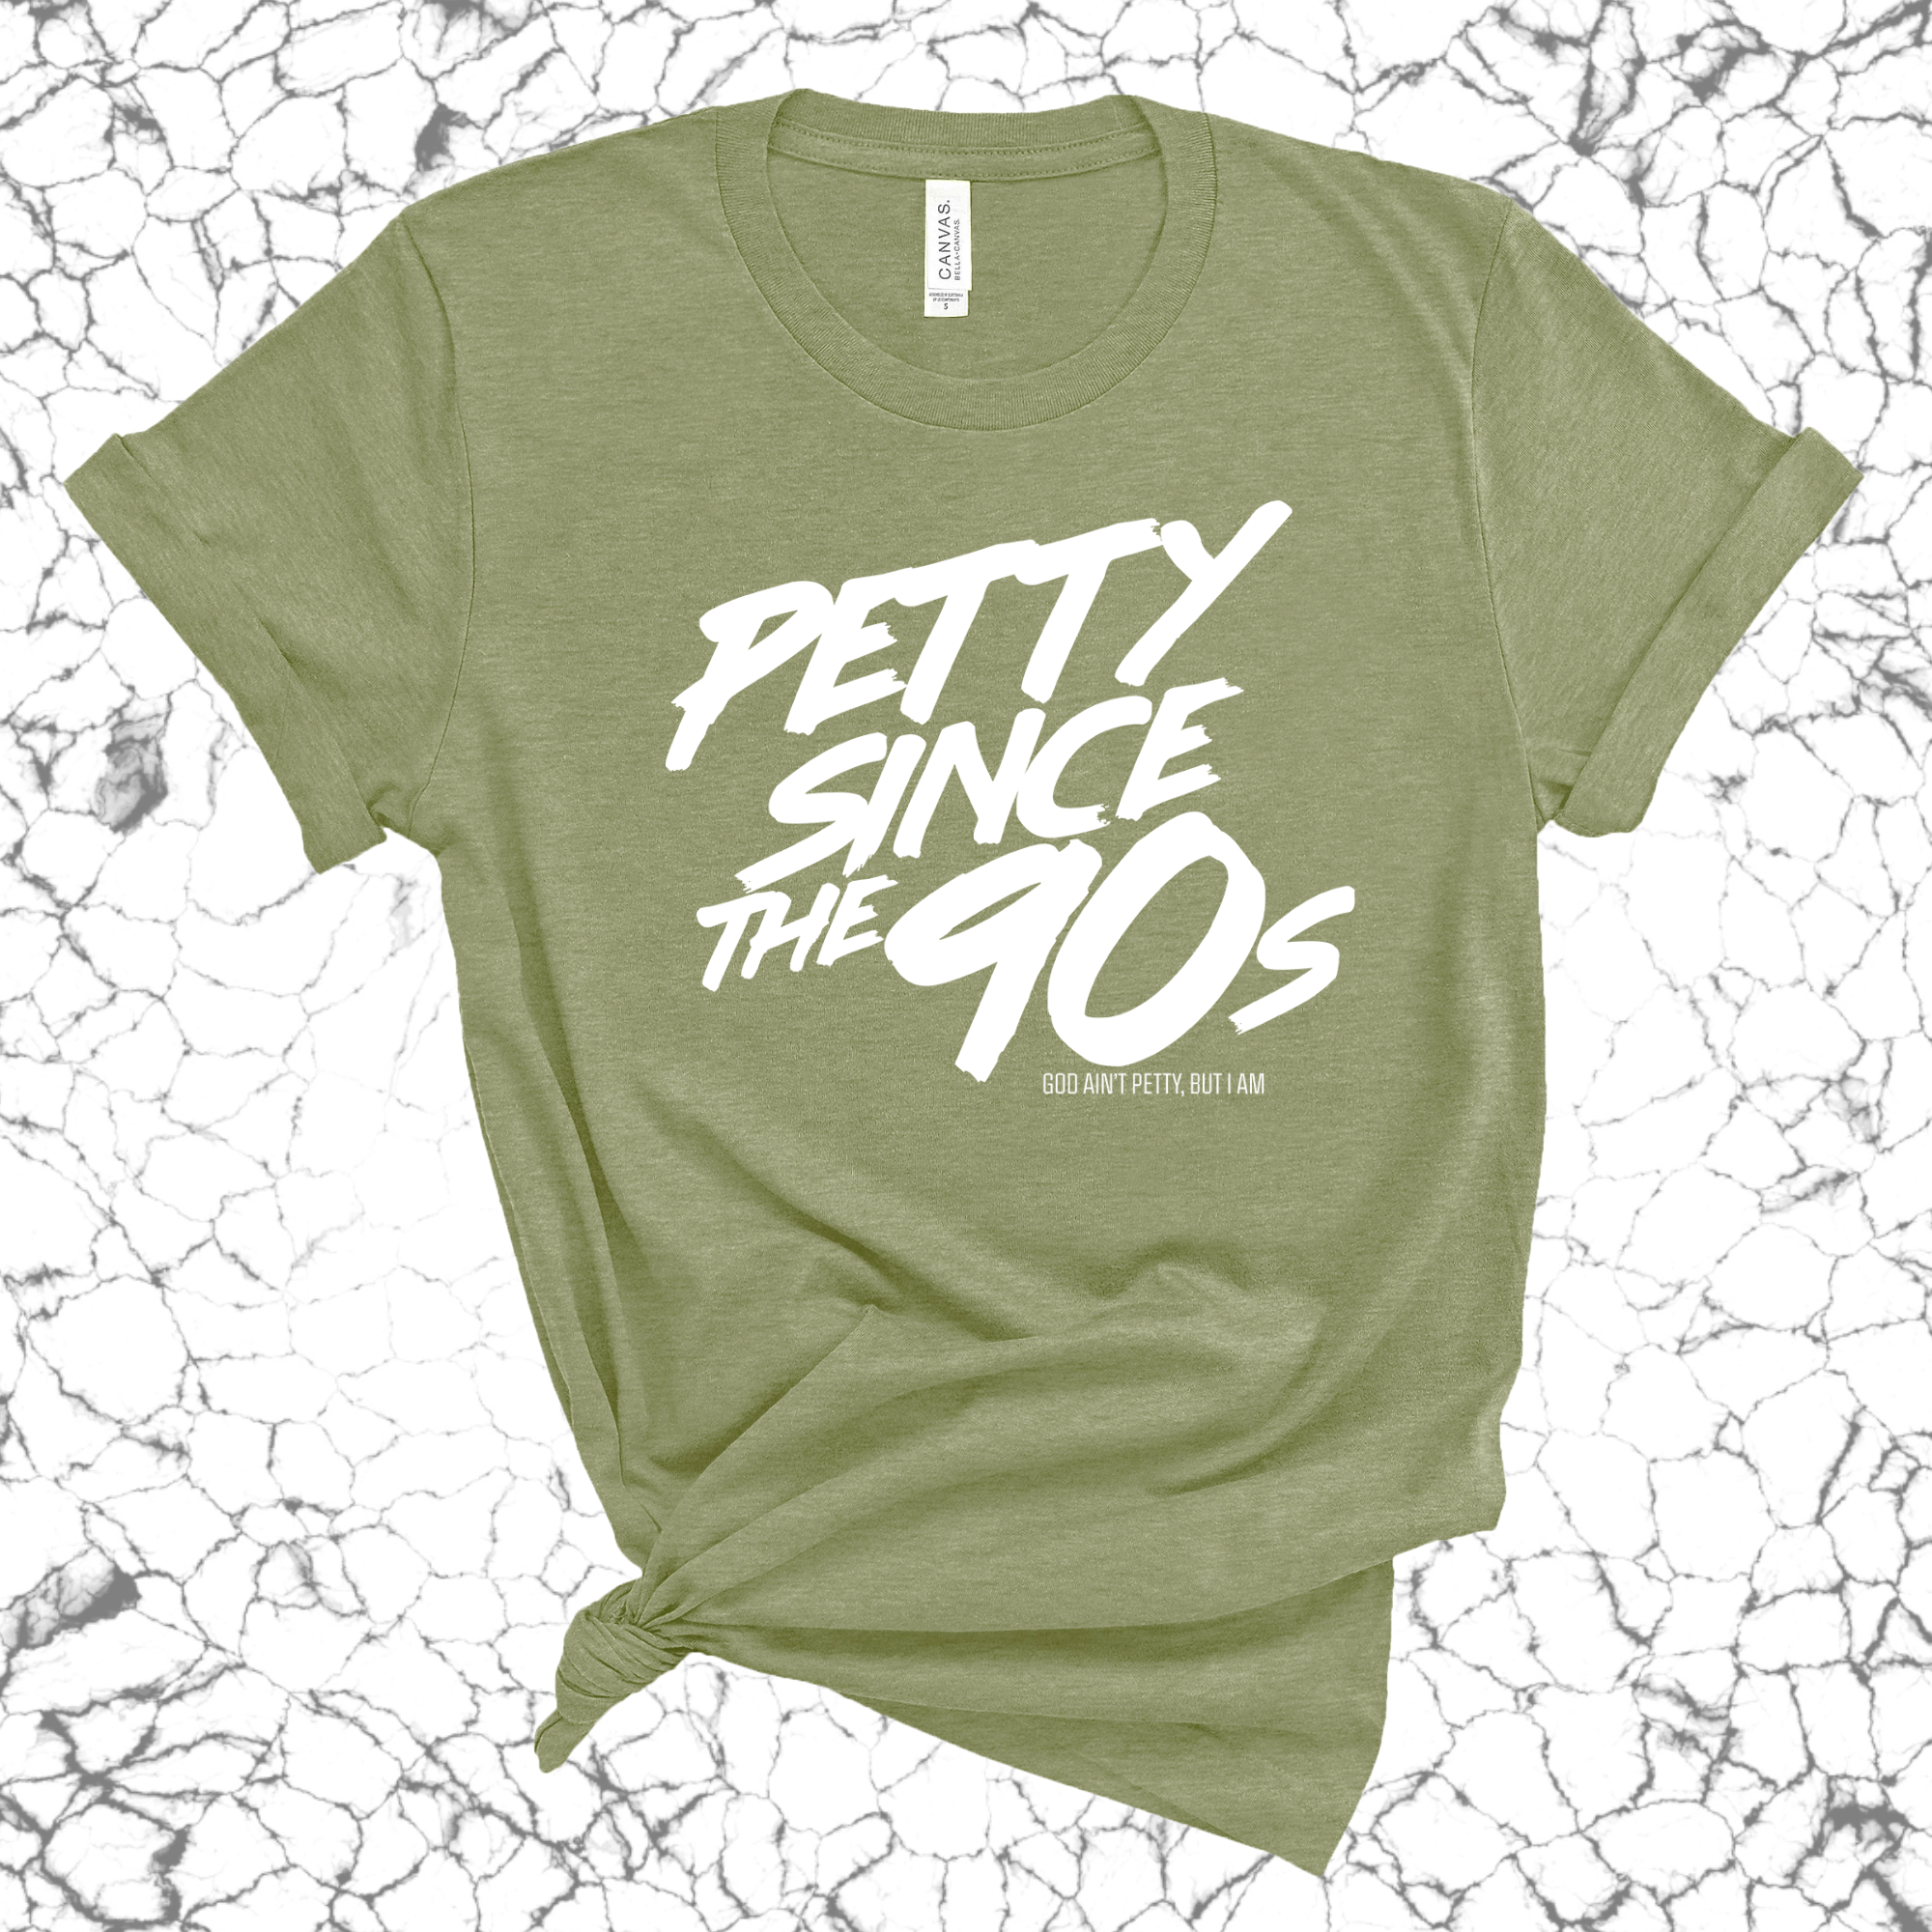 Petty Since the 90s Unisex Tee-T-Shirt-The Original God Ain't Petty But I Am